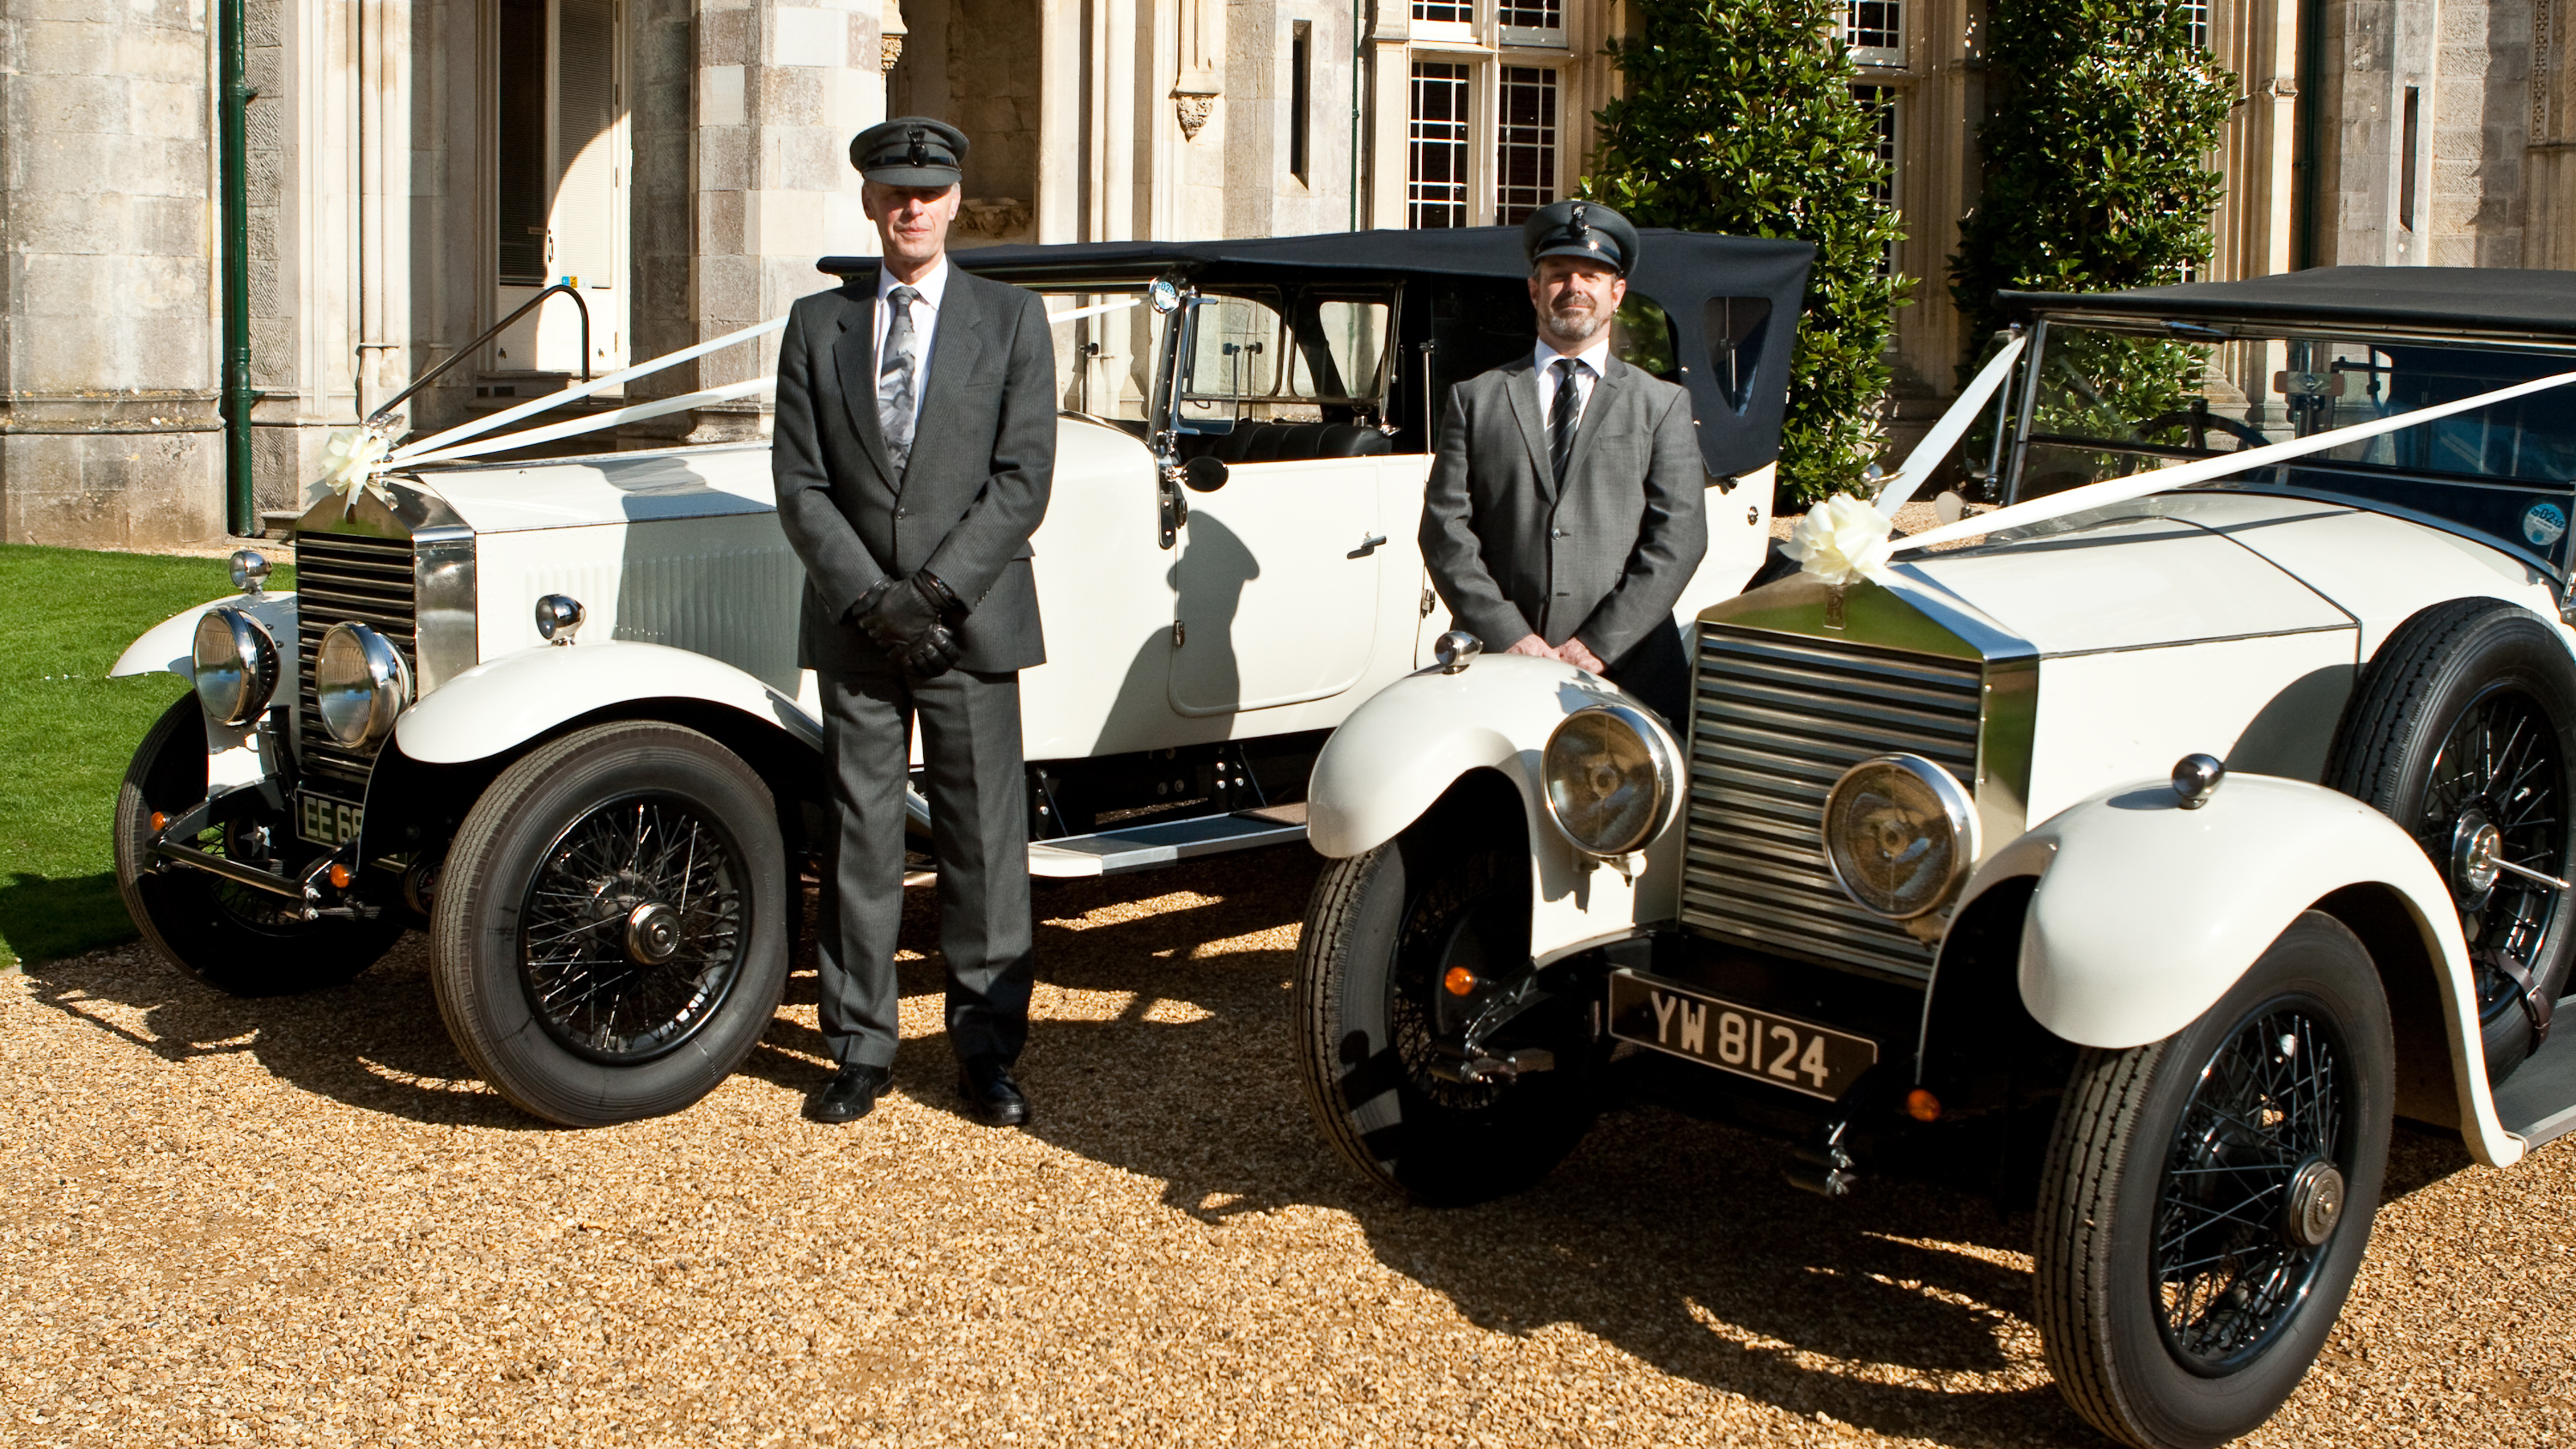 Two vintage wedding cars decorated with white ribbons and bows at a local Blandford Forum wedding. Both vehicles are parked side-by-side with their chauffeurs next to them.